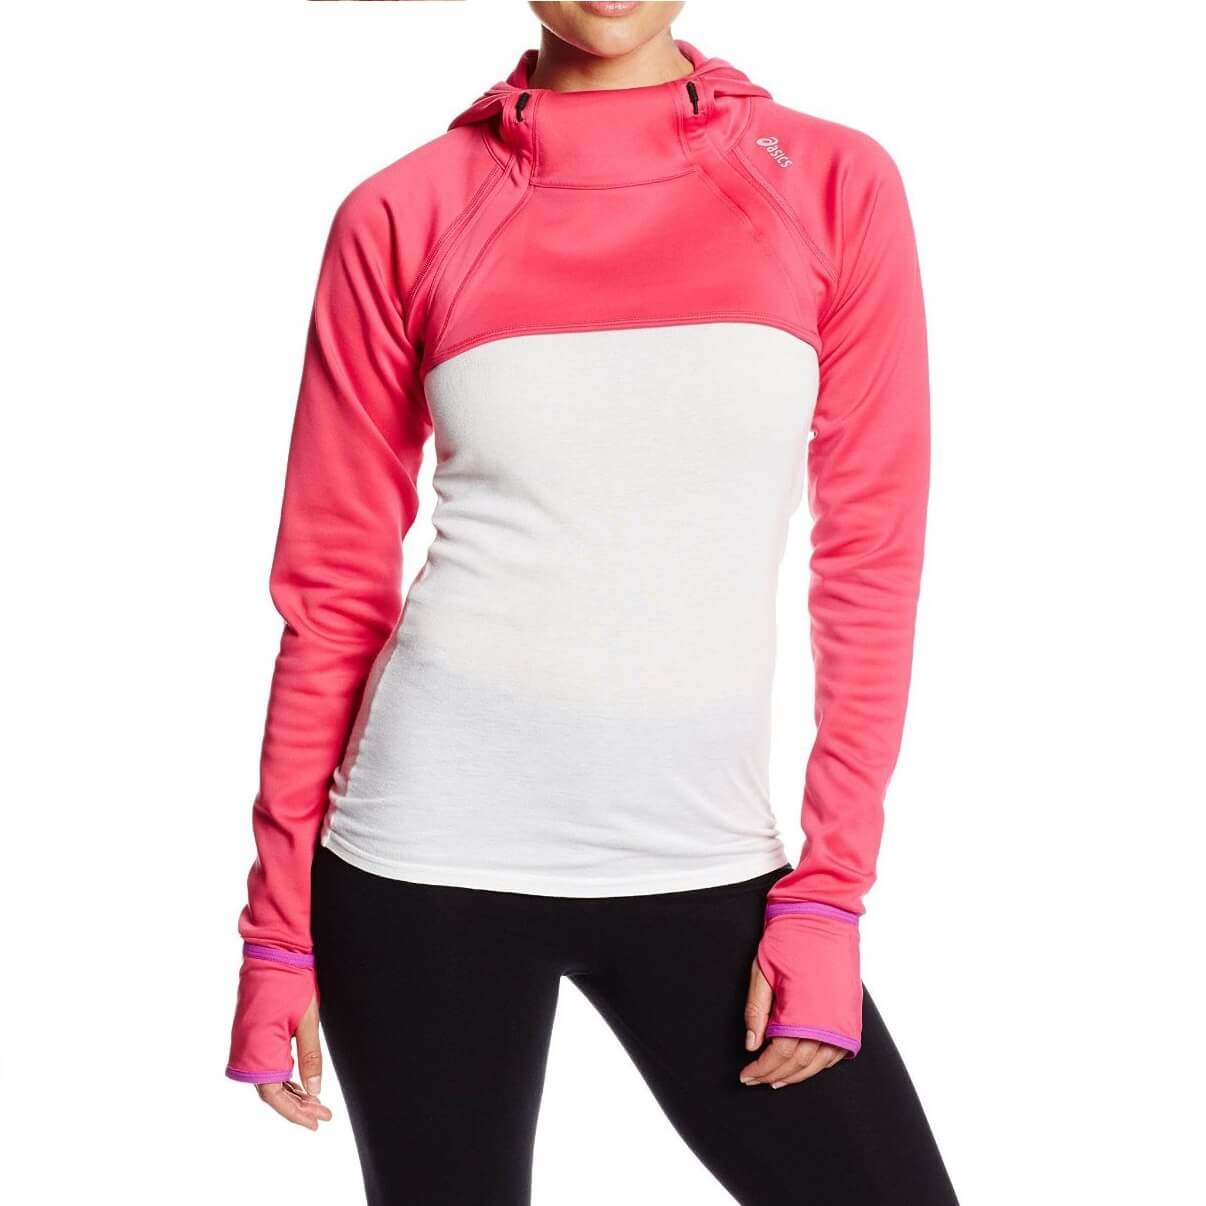 Blusa Cropped Asics Illusion Running Fitness Ciclismo Casual